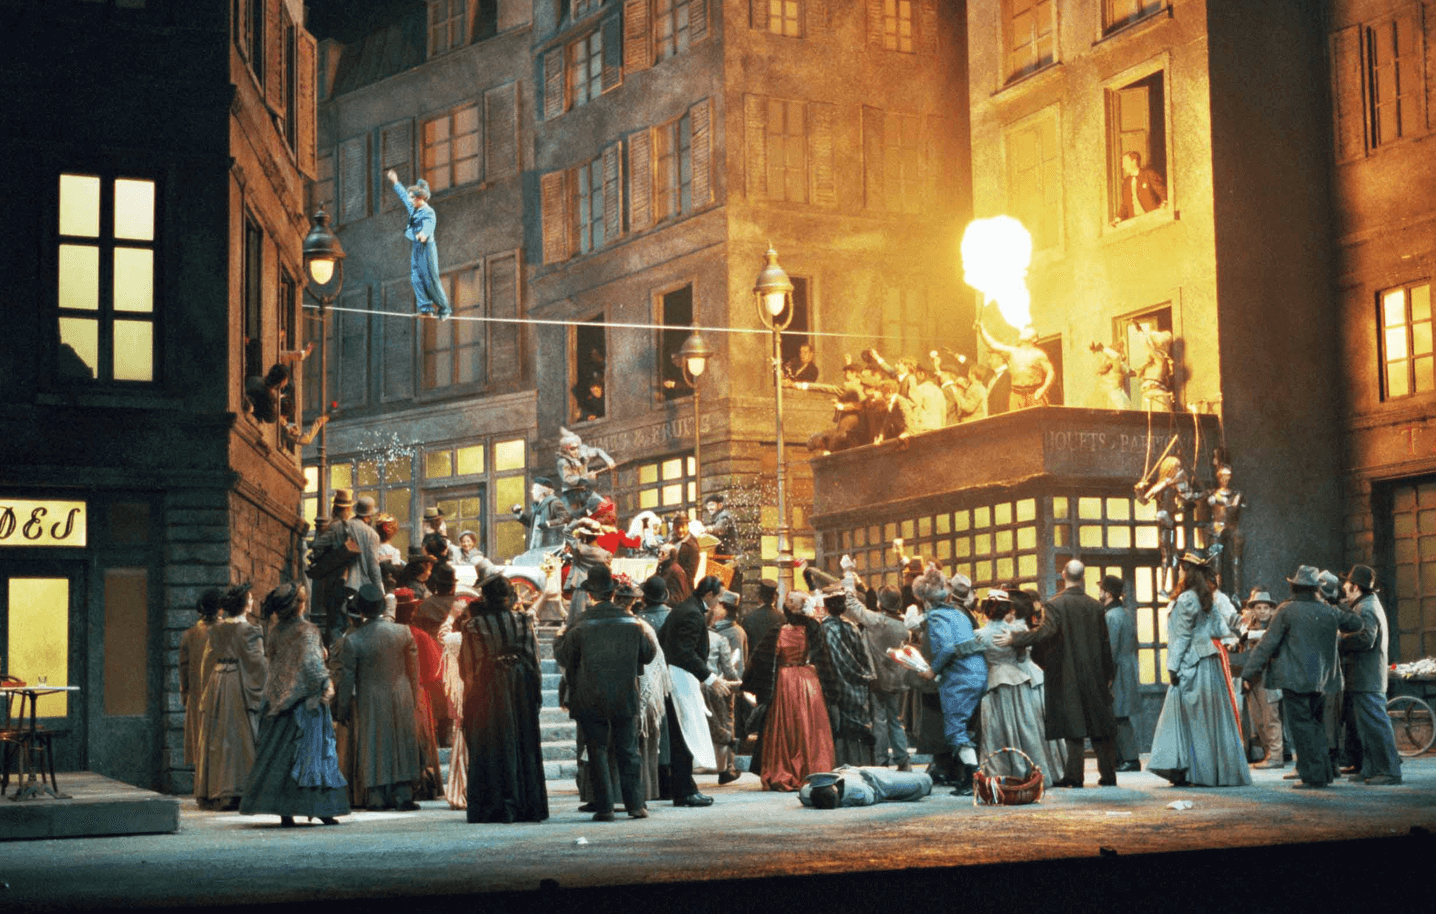 “La Bohème” in the Real was first performed the year of the reopening as an opera house (1998) under the direction of Giancarlo of Monaco. Photo: Javier at the Real